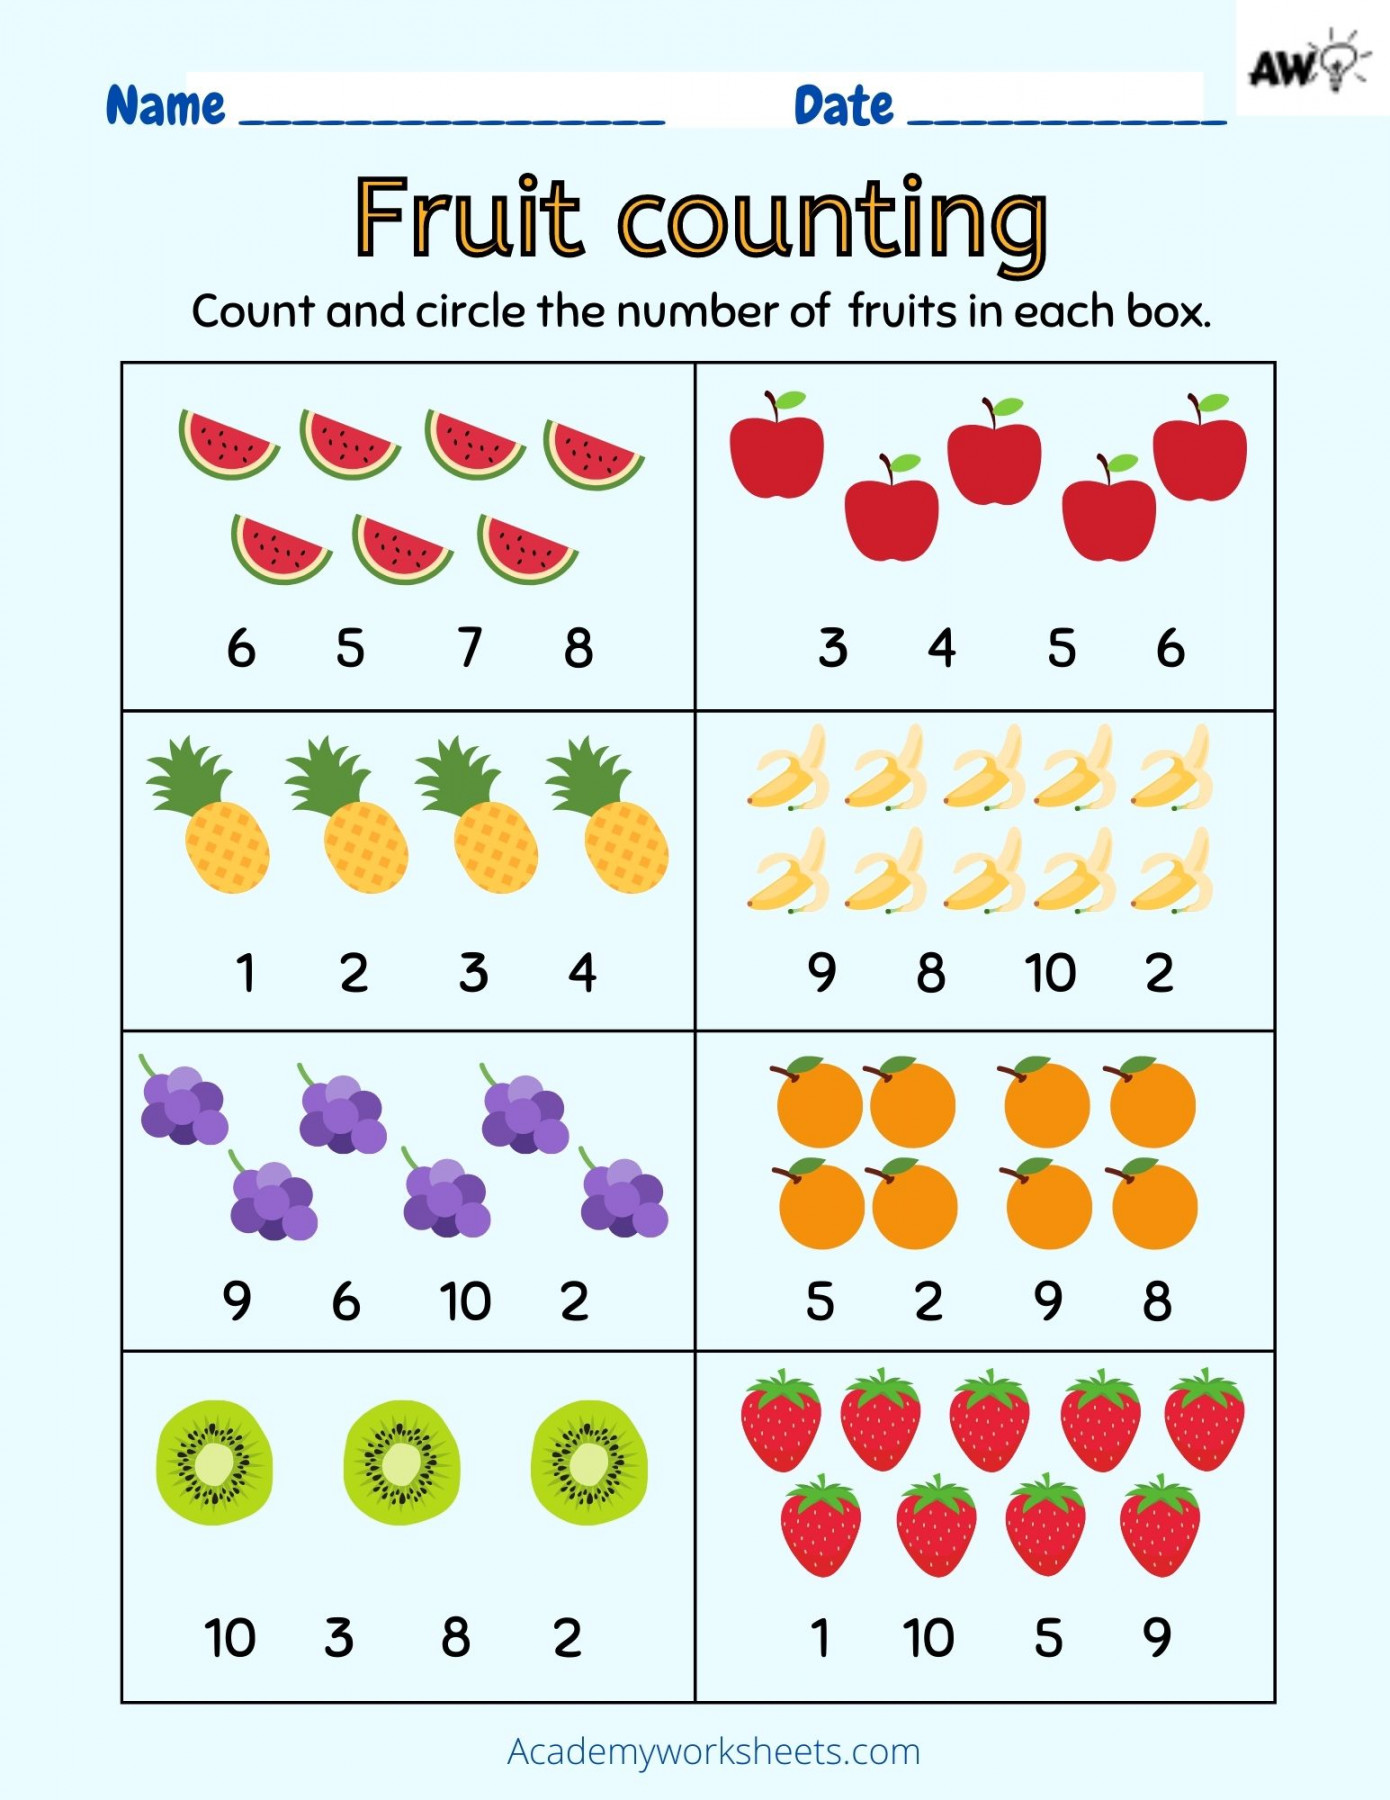 Count, Match and Color Fruit -0 - Academy Worksheets